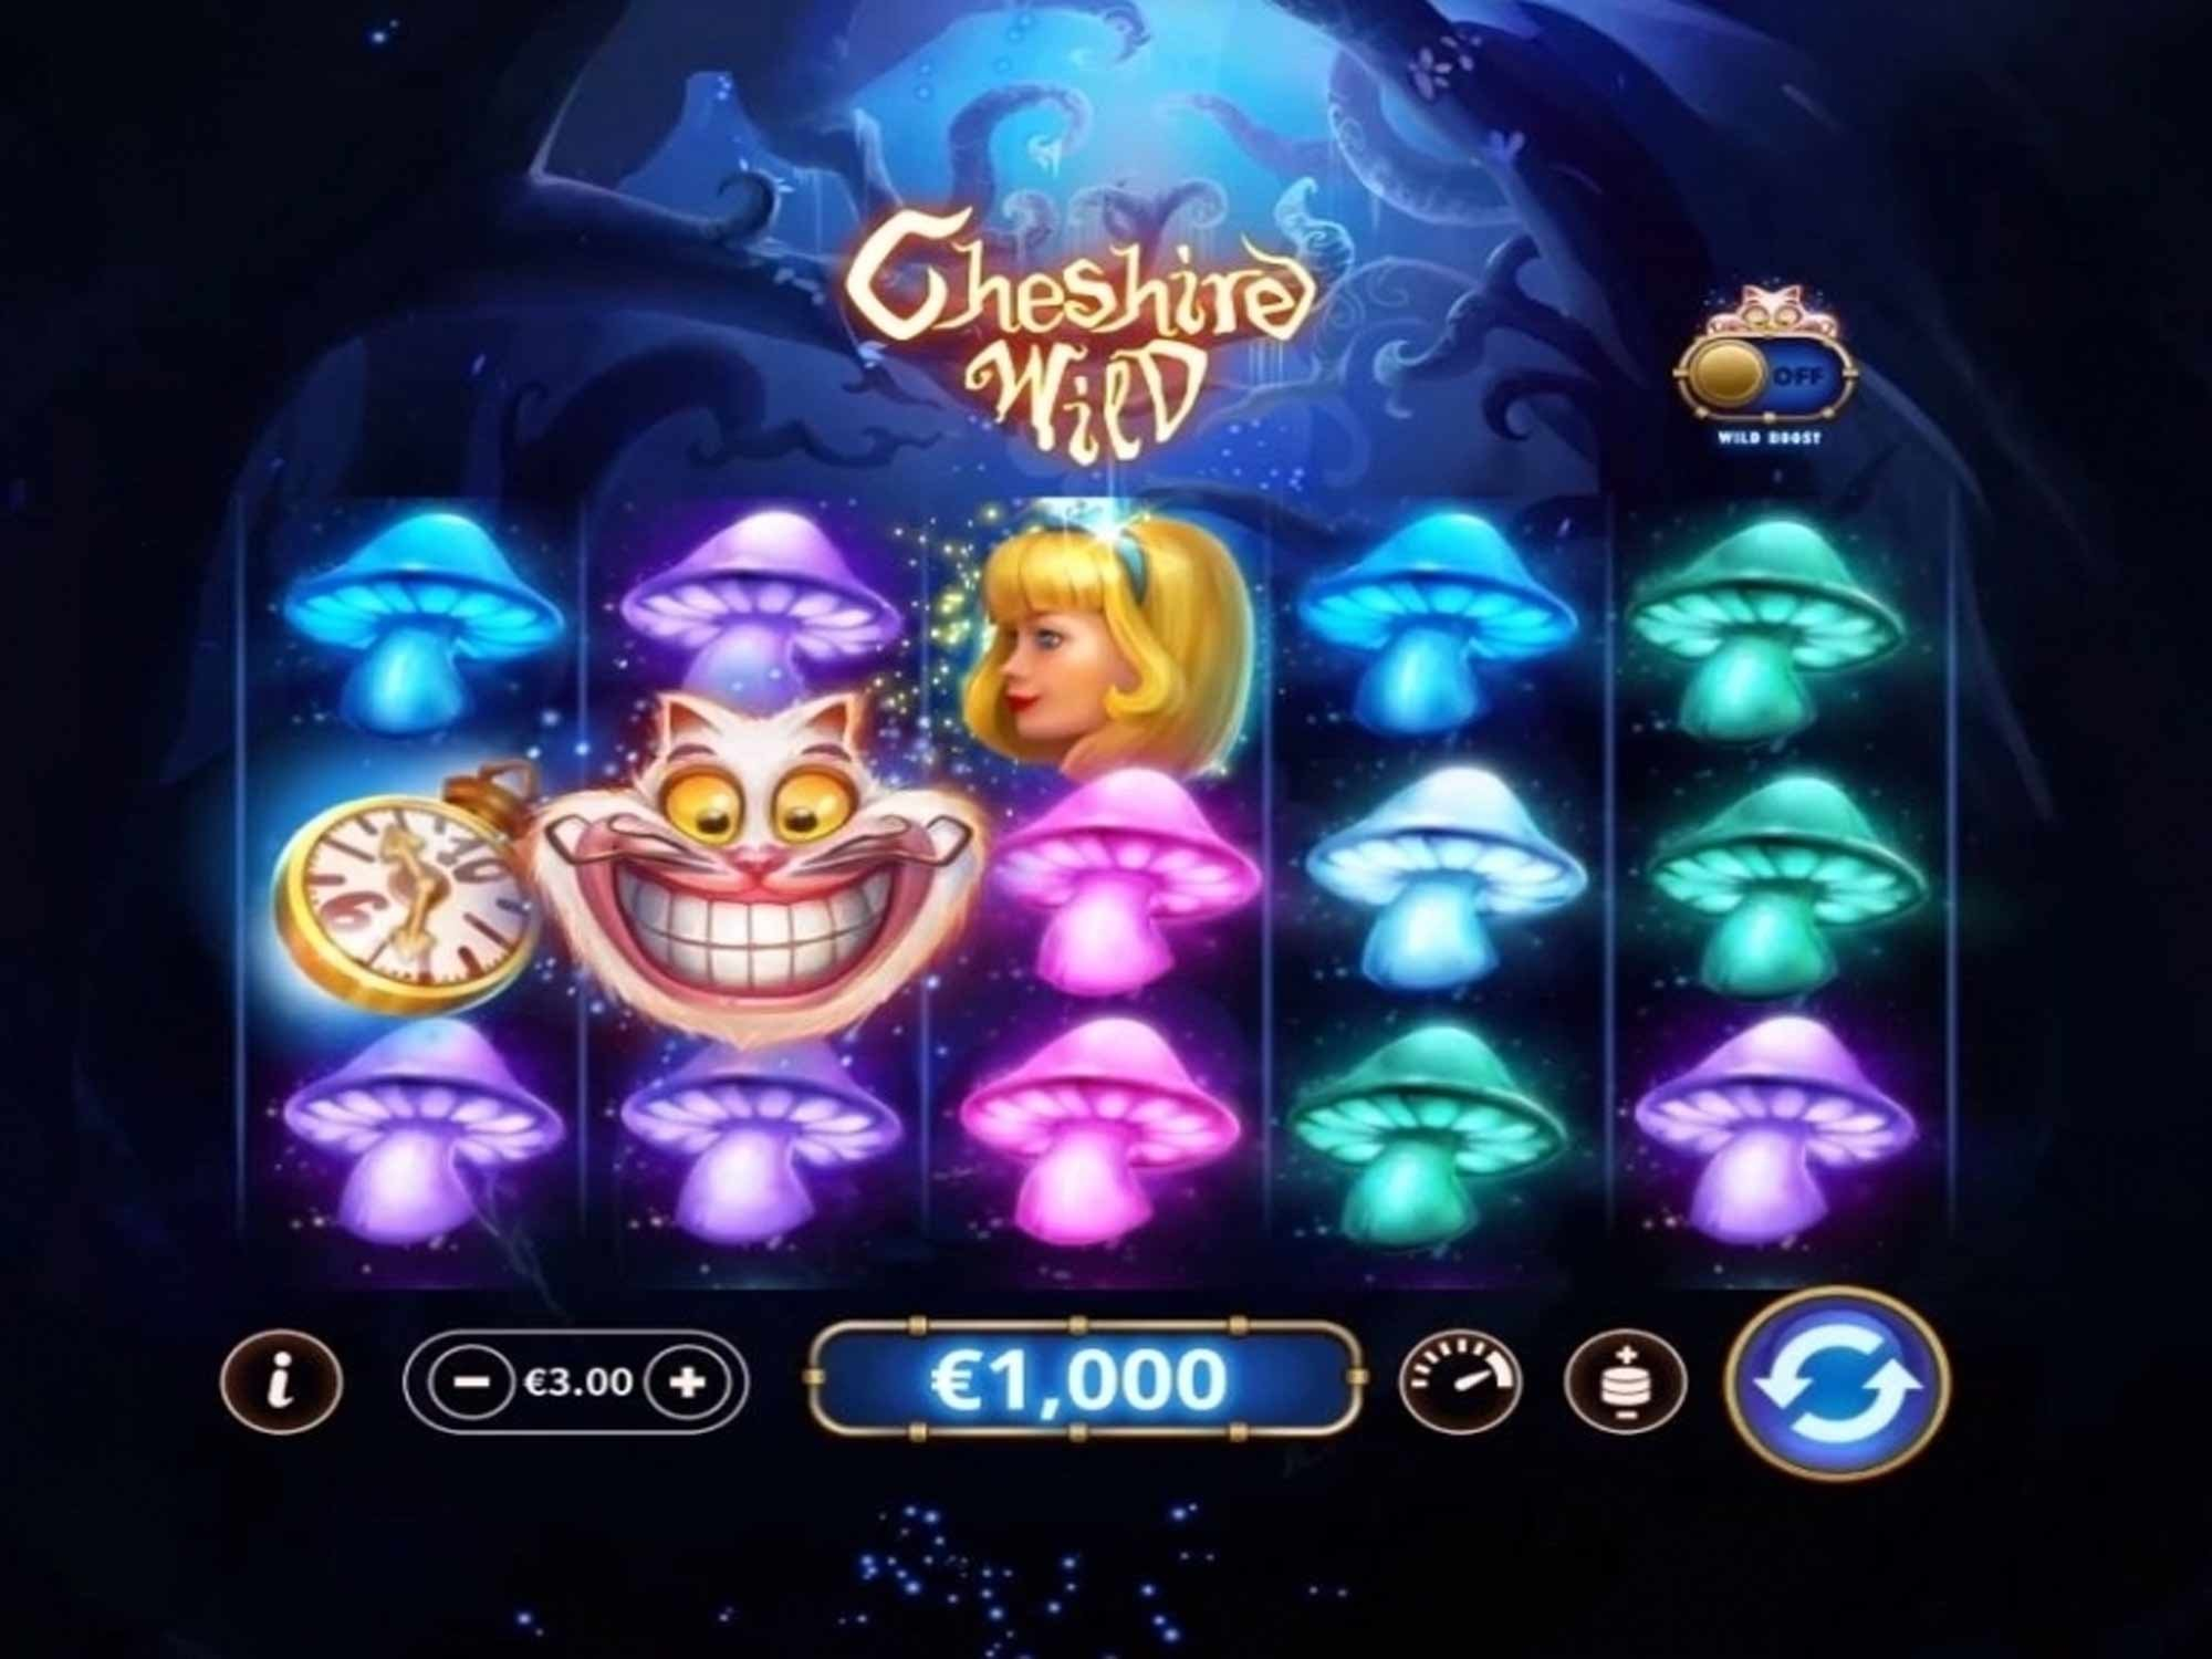 The Cheshire Wild Online Slot Demo Game by Skywind